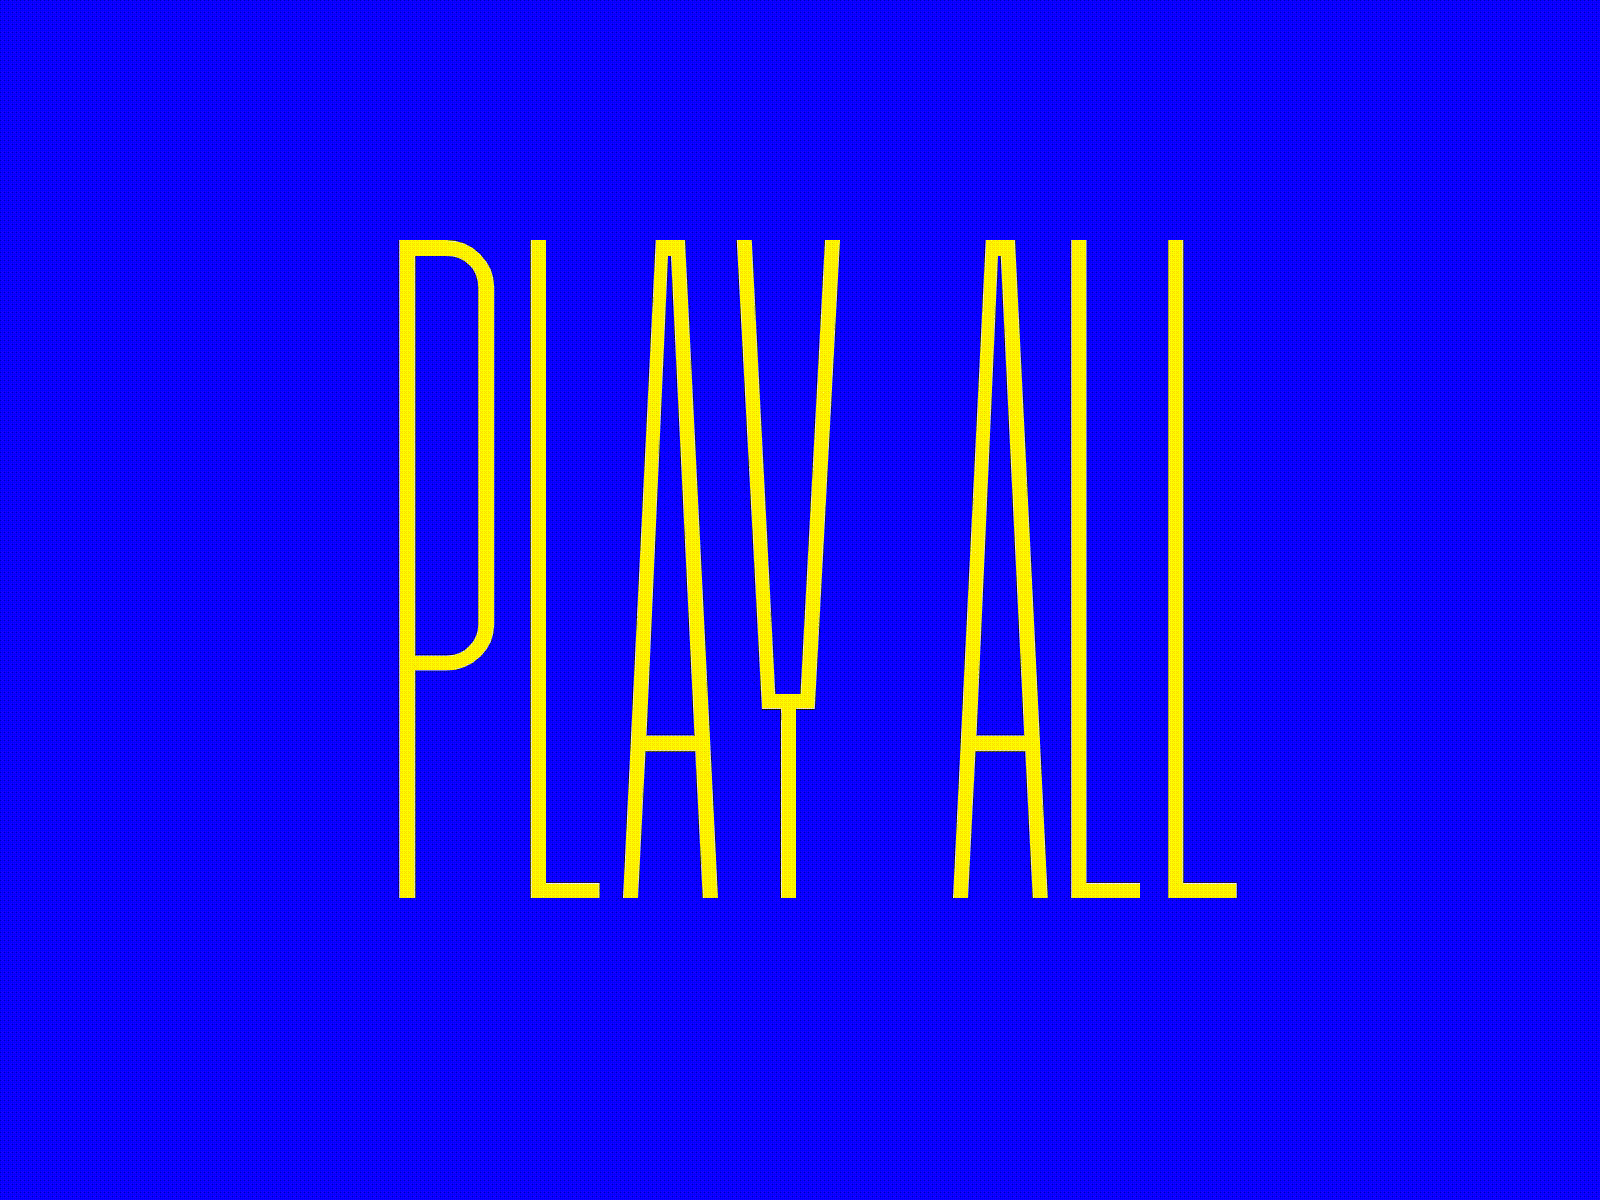 Kotei™ Condensed - Play All condensed font cool font graphicdesign kinetic type kobufoundry play sans serif typedesign typeface typogaphy variable fonts variablefont